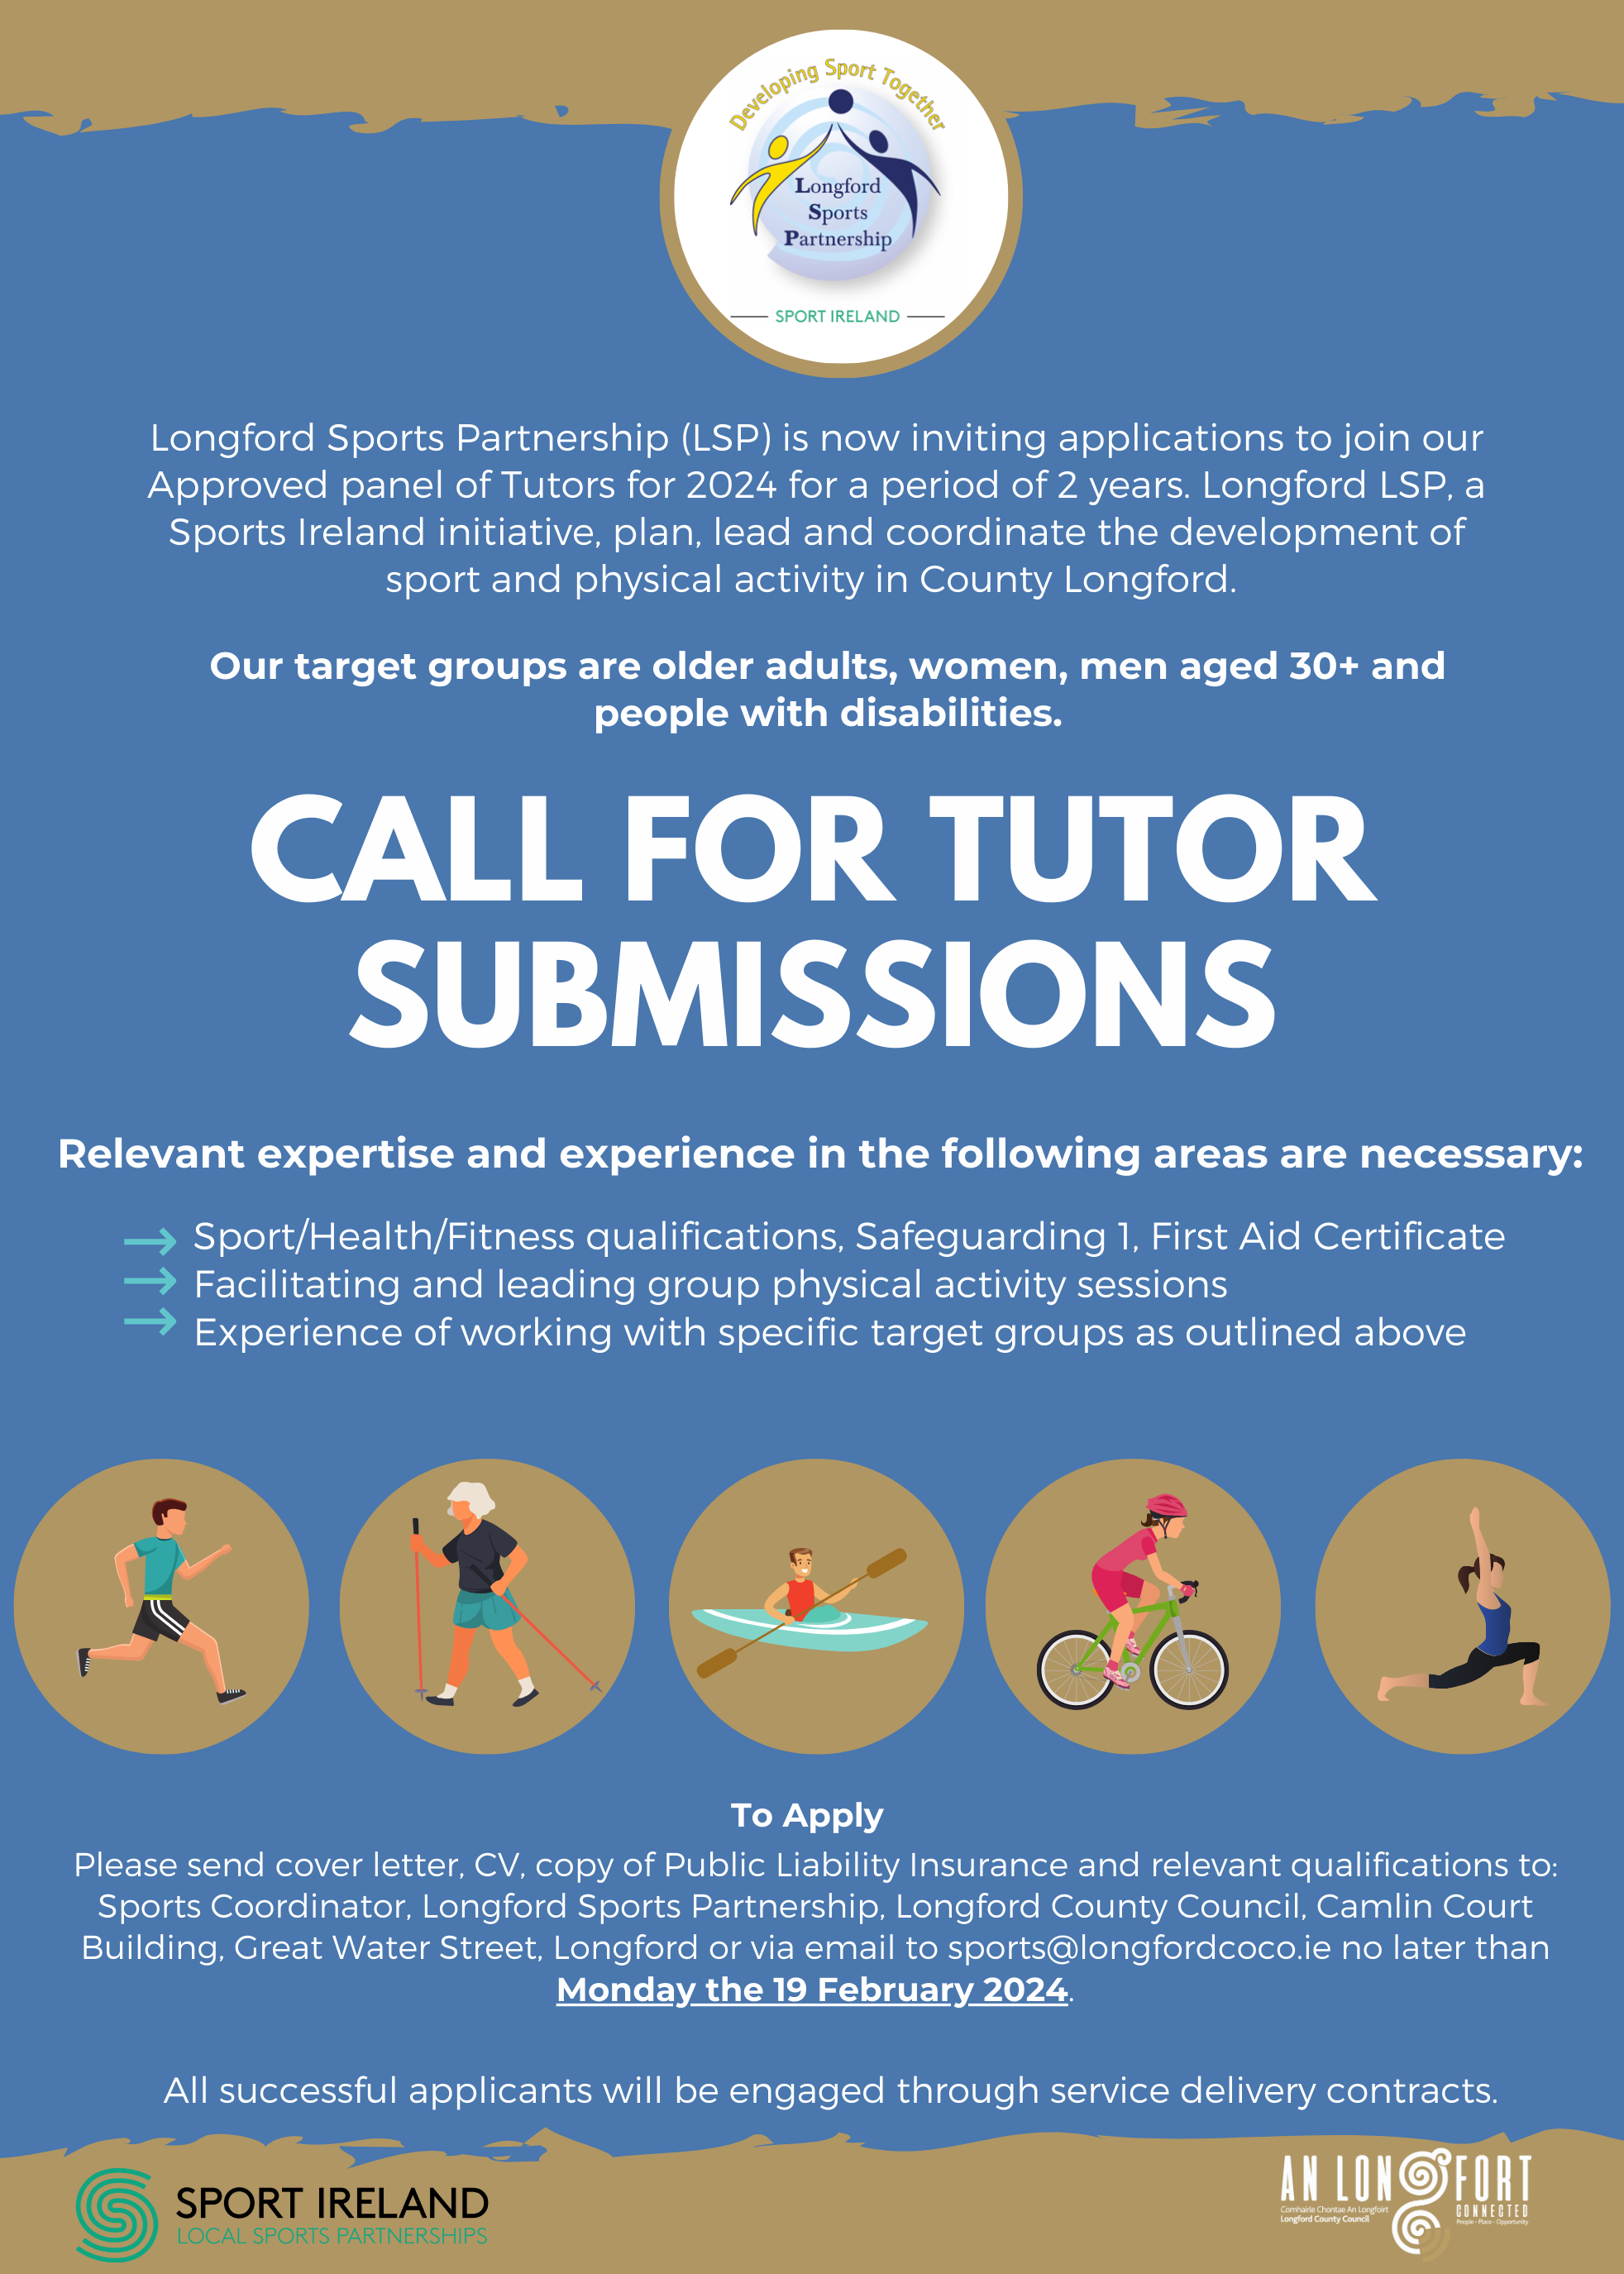 Tutor-Submissions-poster-2024